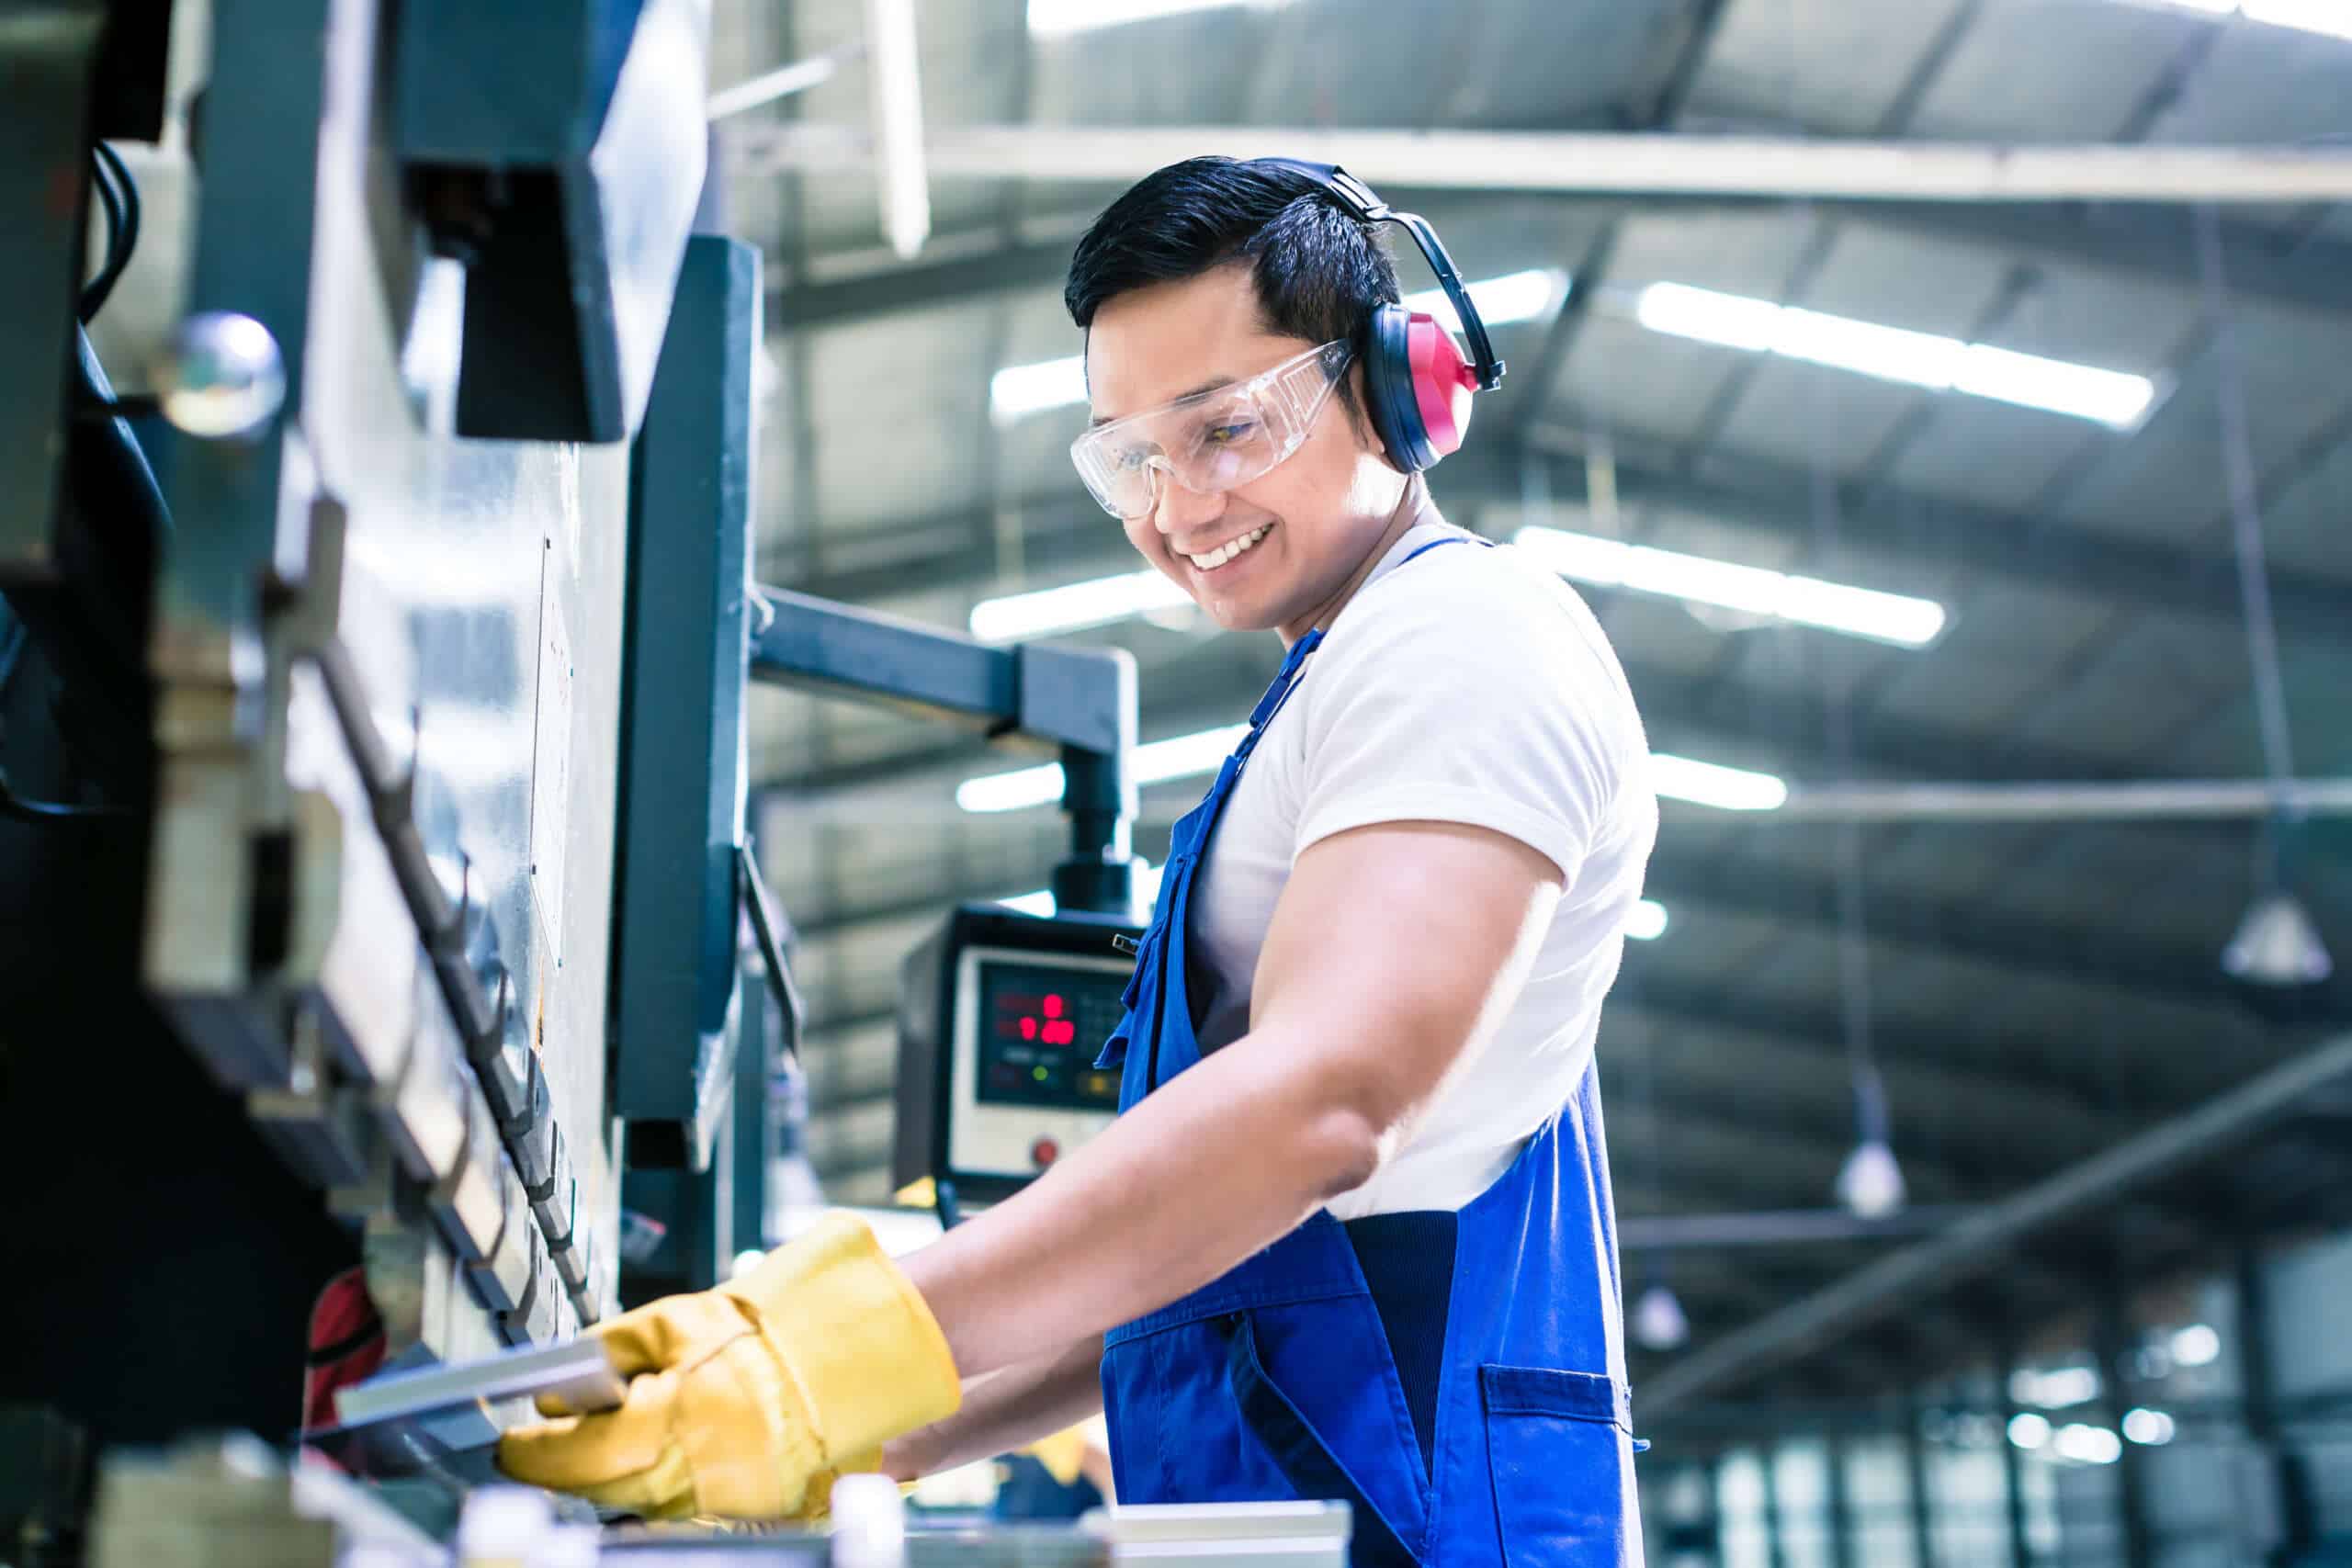 A engaged employee at a manufacturing plant works with machinery.